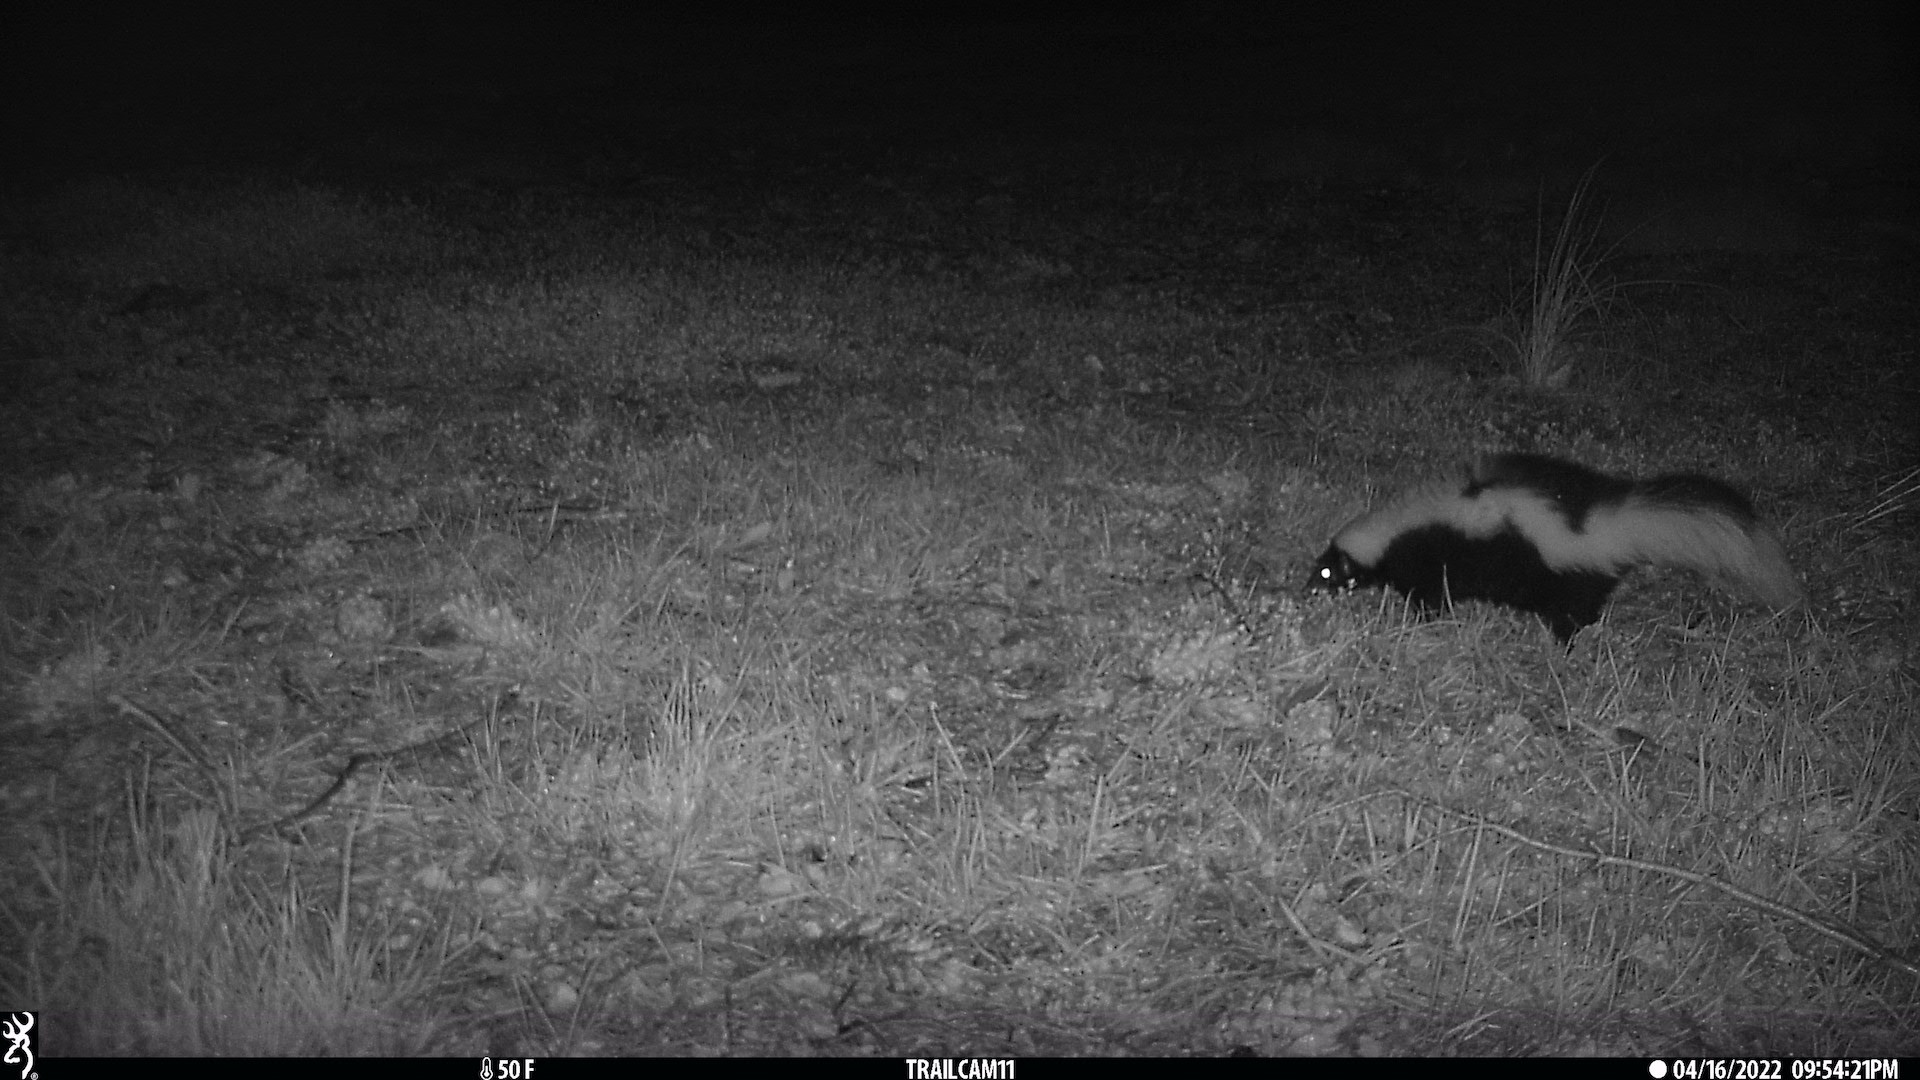 A skunk at night captured by camera trap